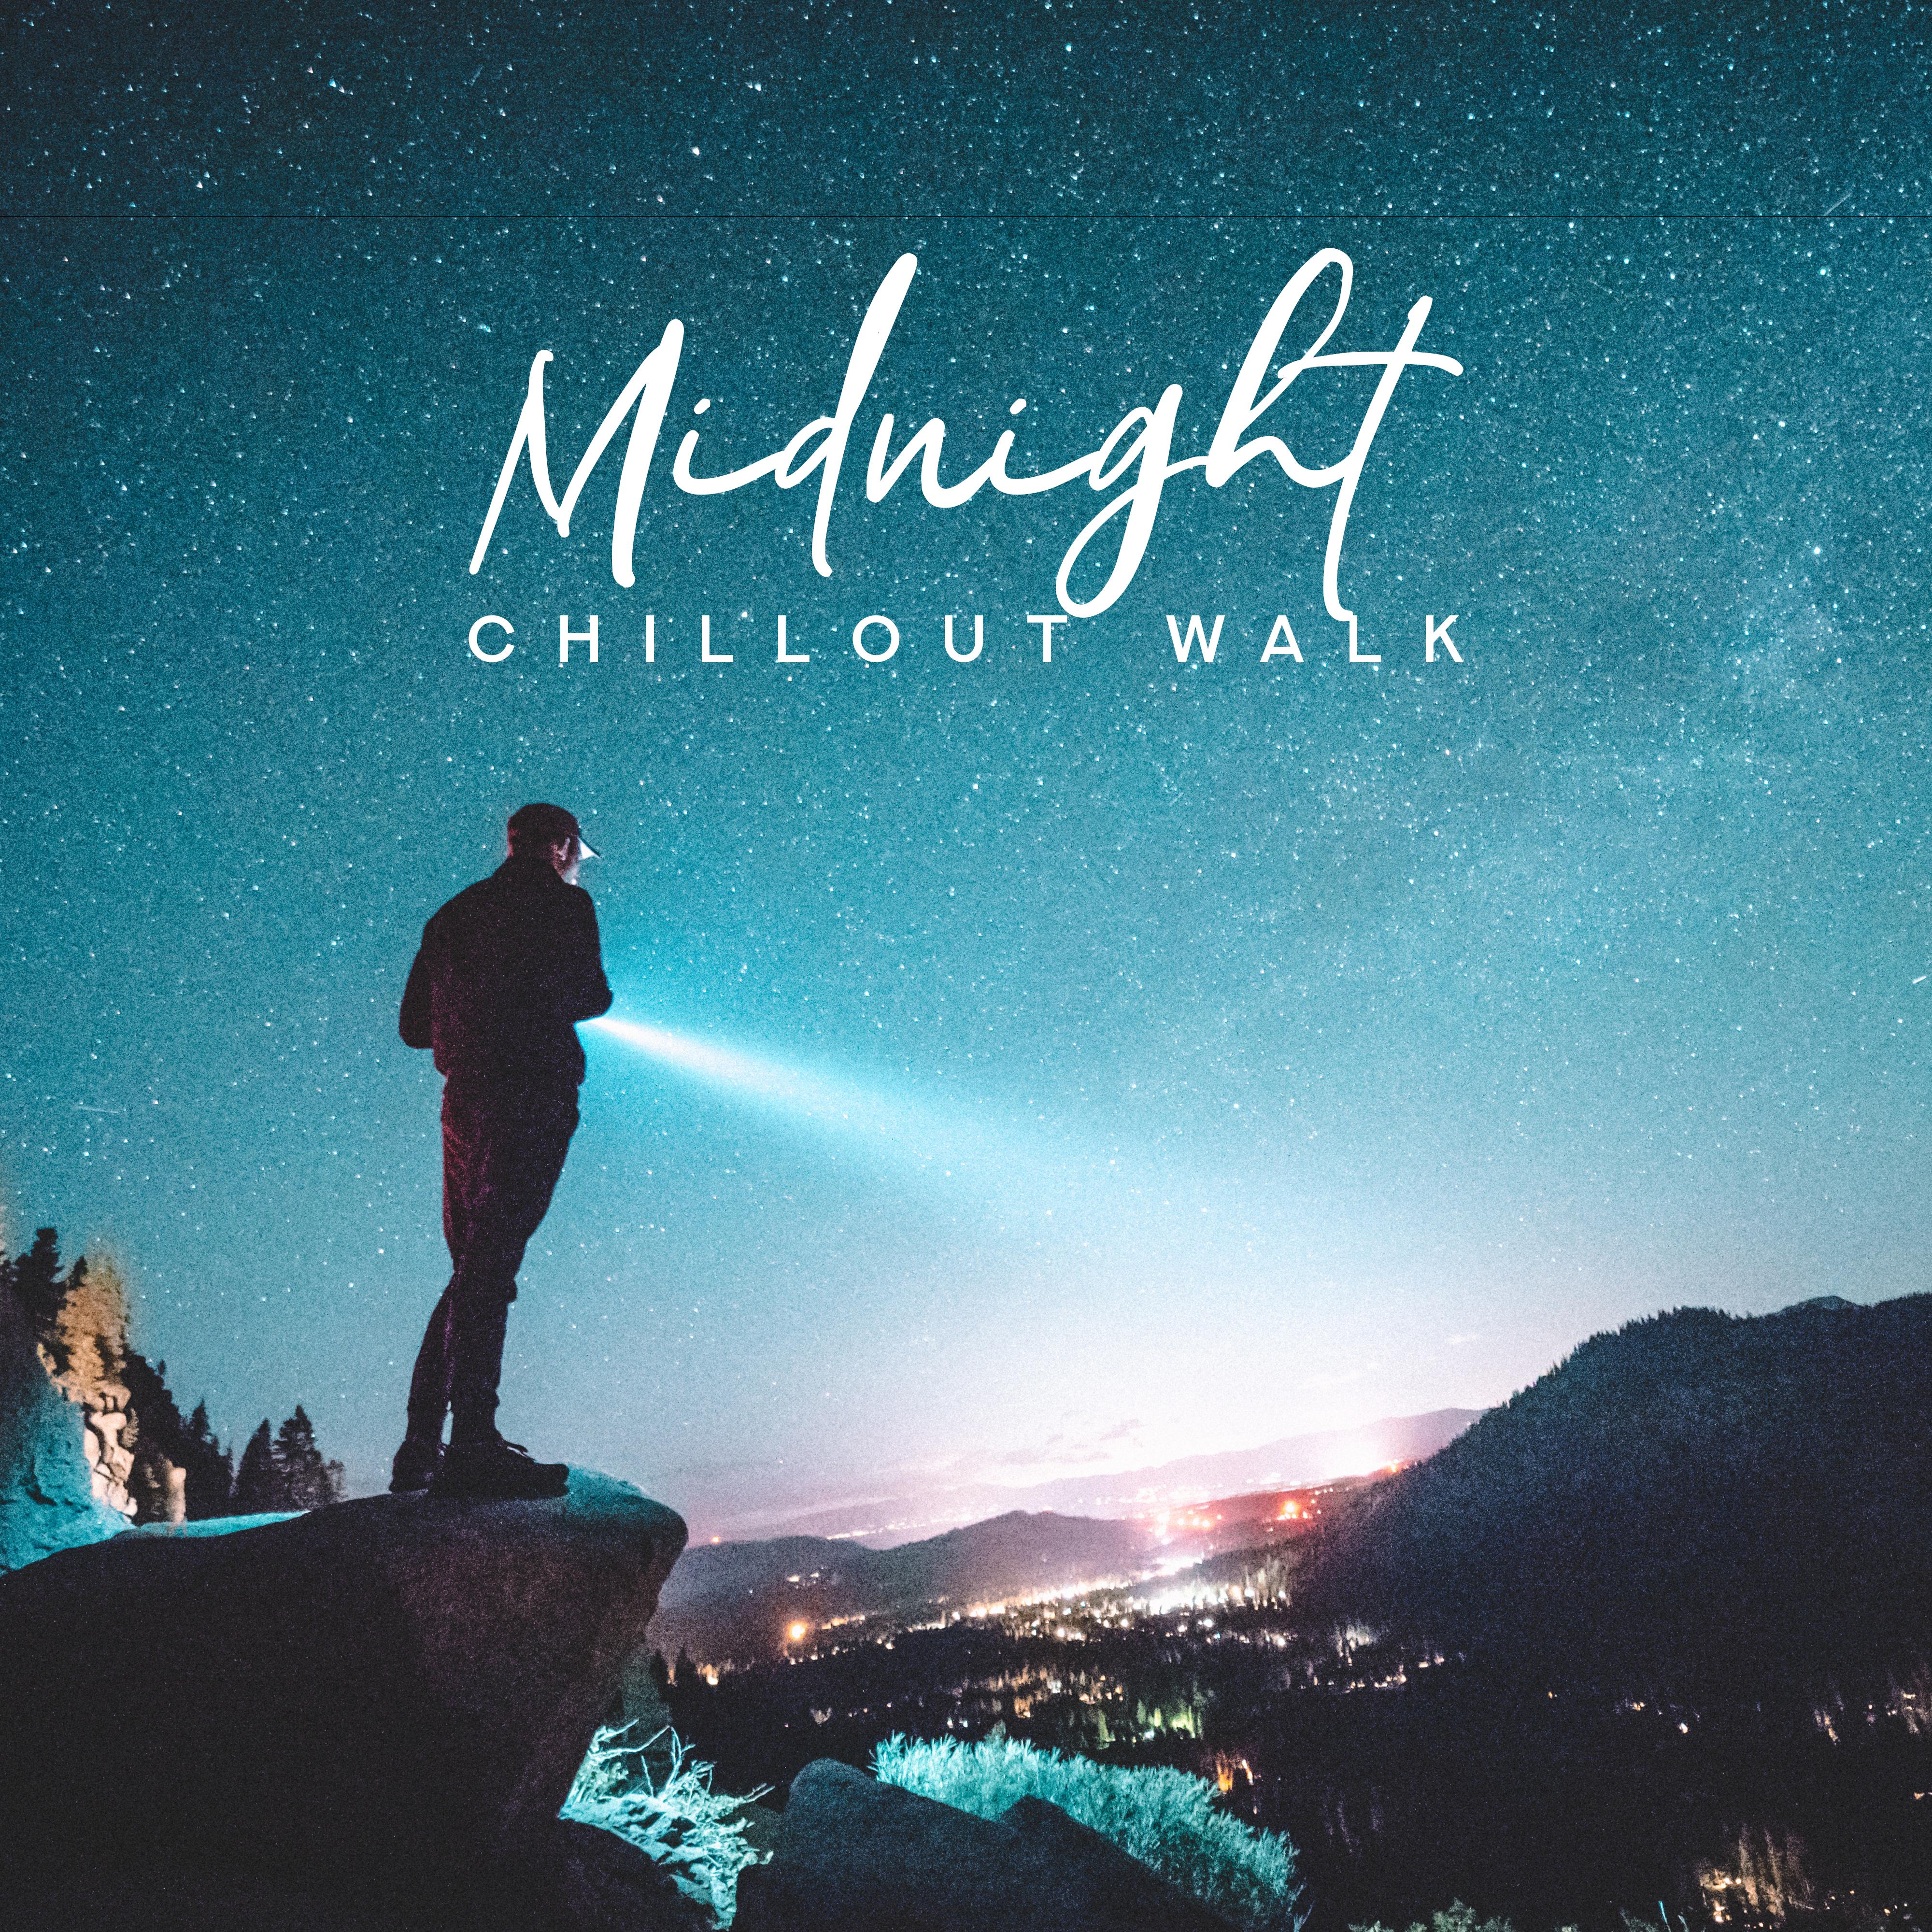 Midnight Chillout Walk – Relaxing 2019 Chillout Music for Evening Calming Down, Afterhours Songs, Summer Holiday Vibes